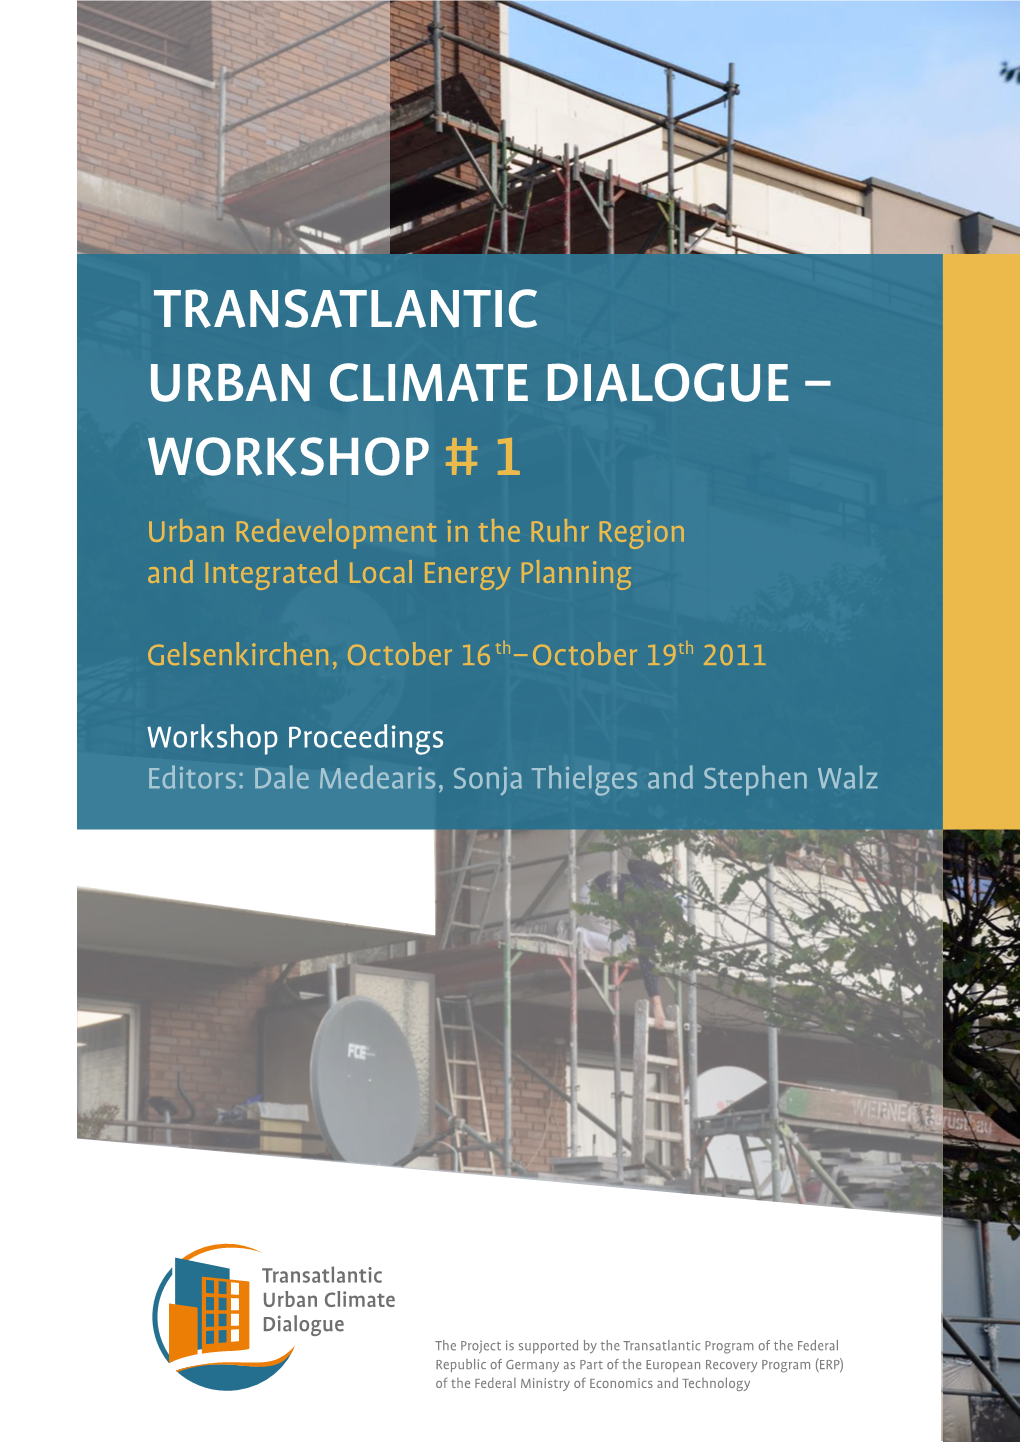 TRANSATLANTIC URBAN CLIMATE DIALOGUE – WORKSHOP # 1 Urban Redevelopment in the Ruhr Region and Integrated Local Energy Planning